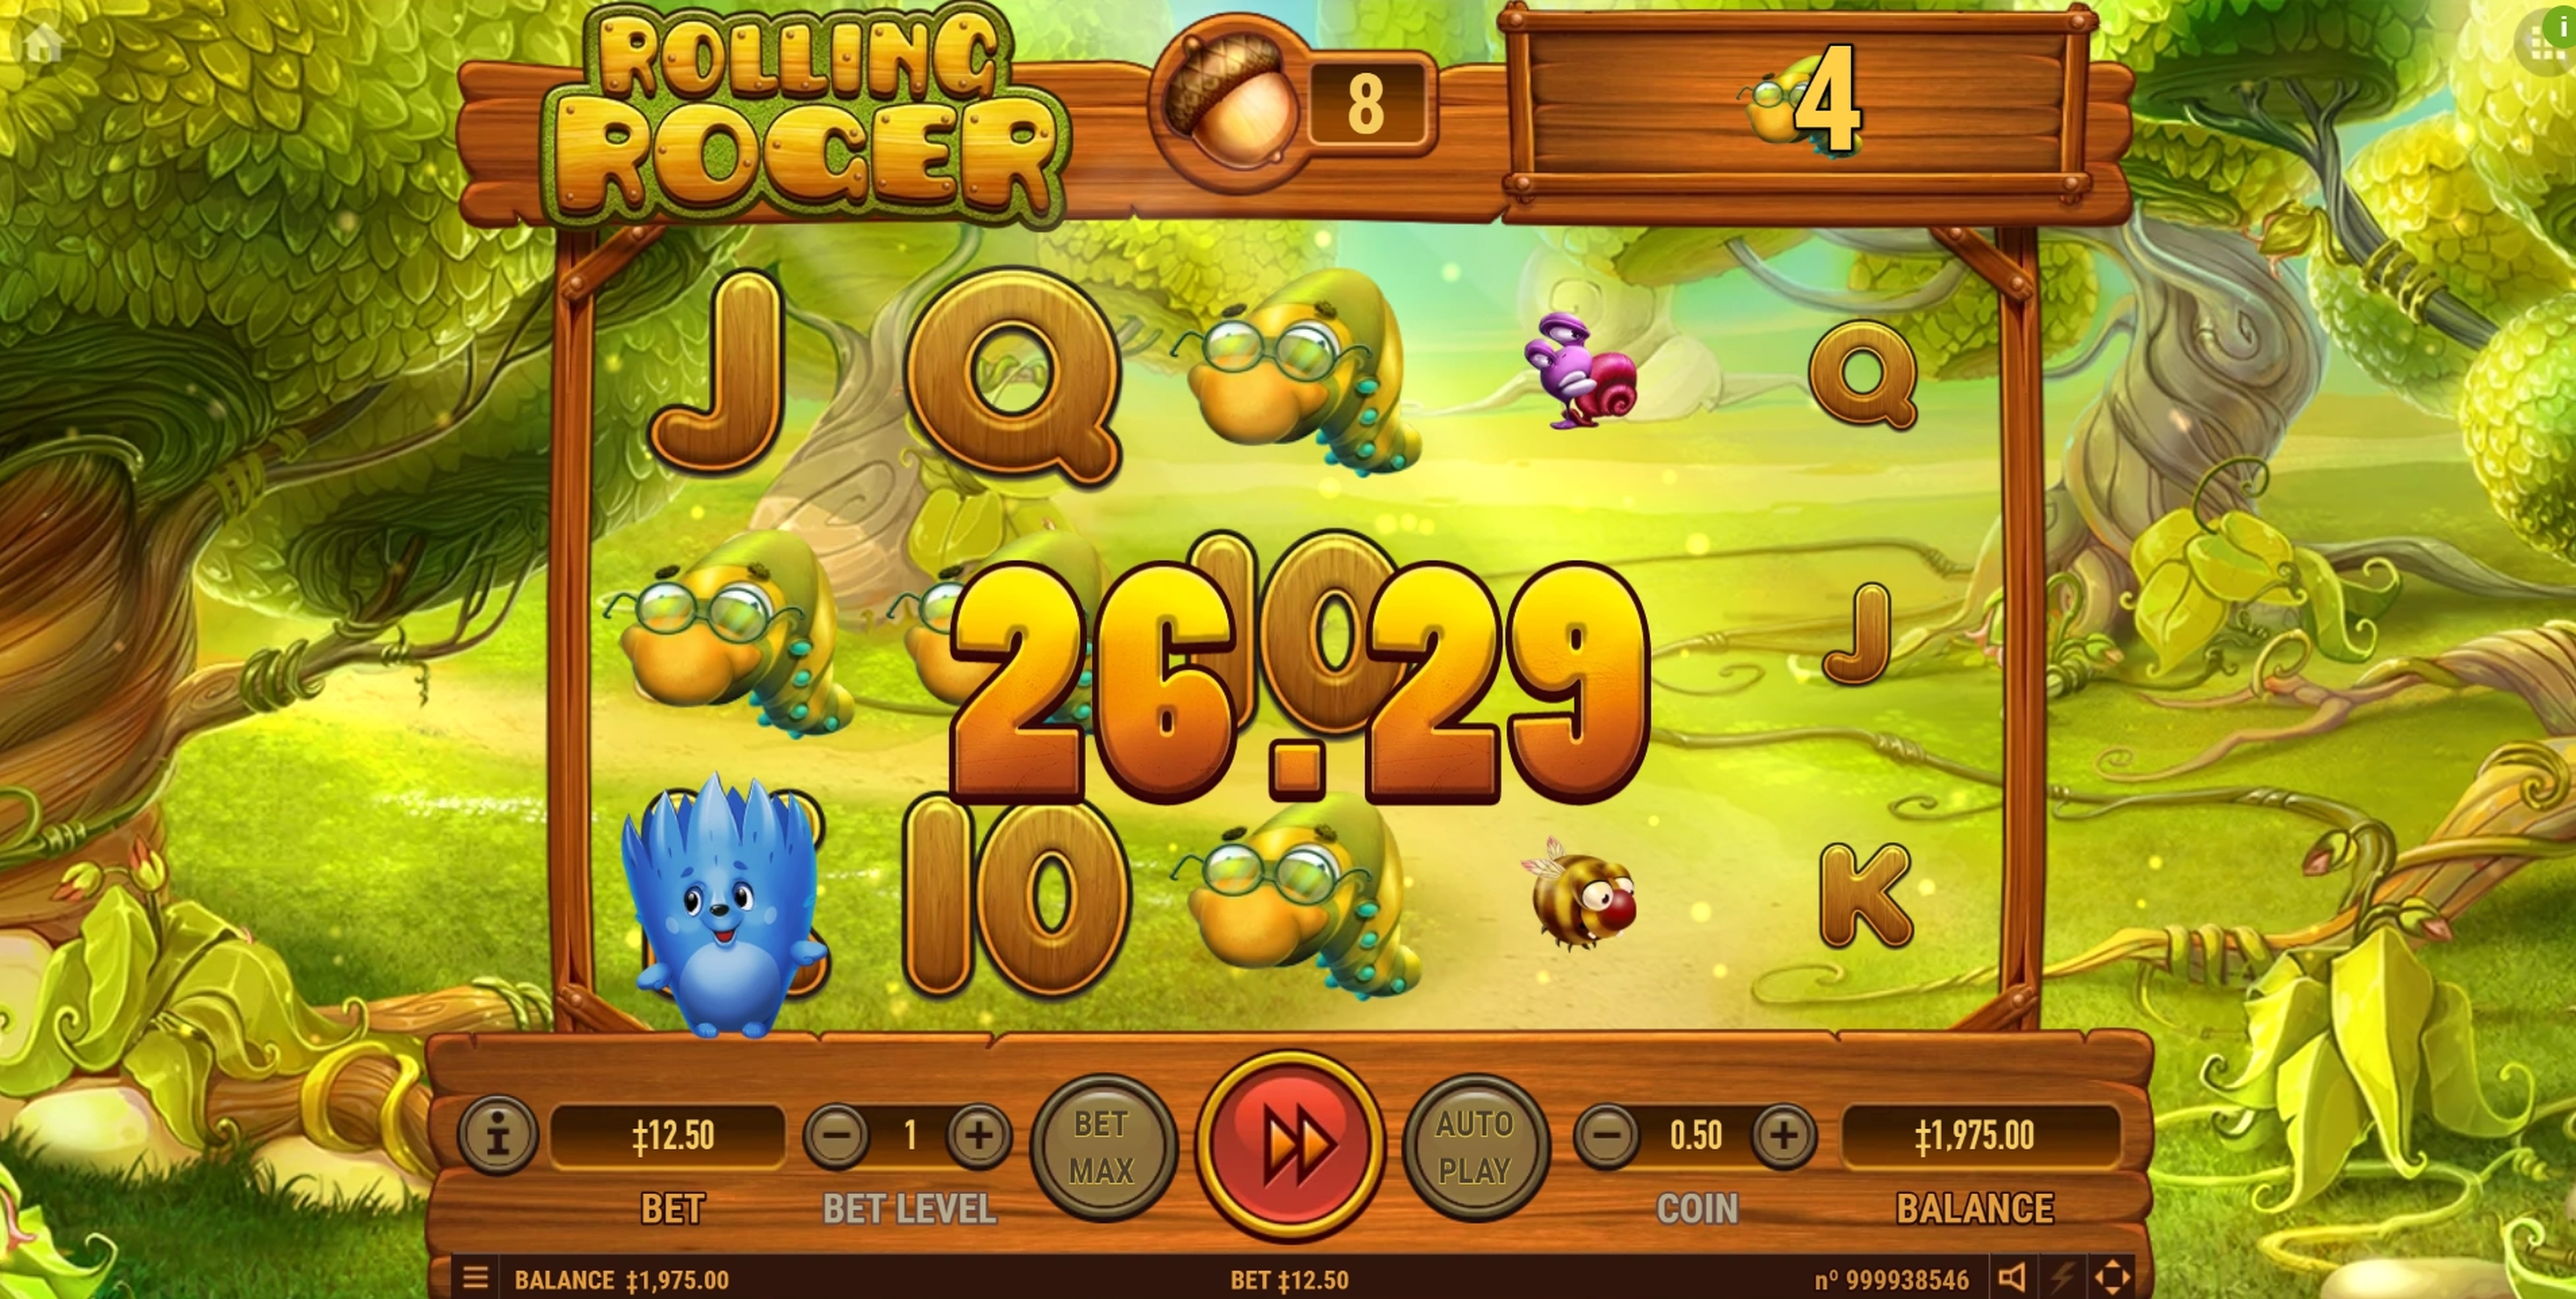 Win Money in Rolling Roger Free Slot Game by Habanero